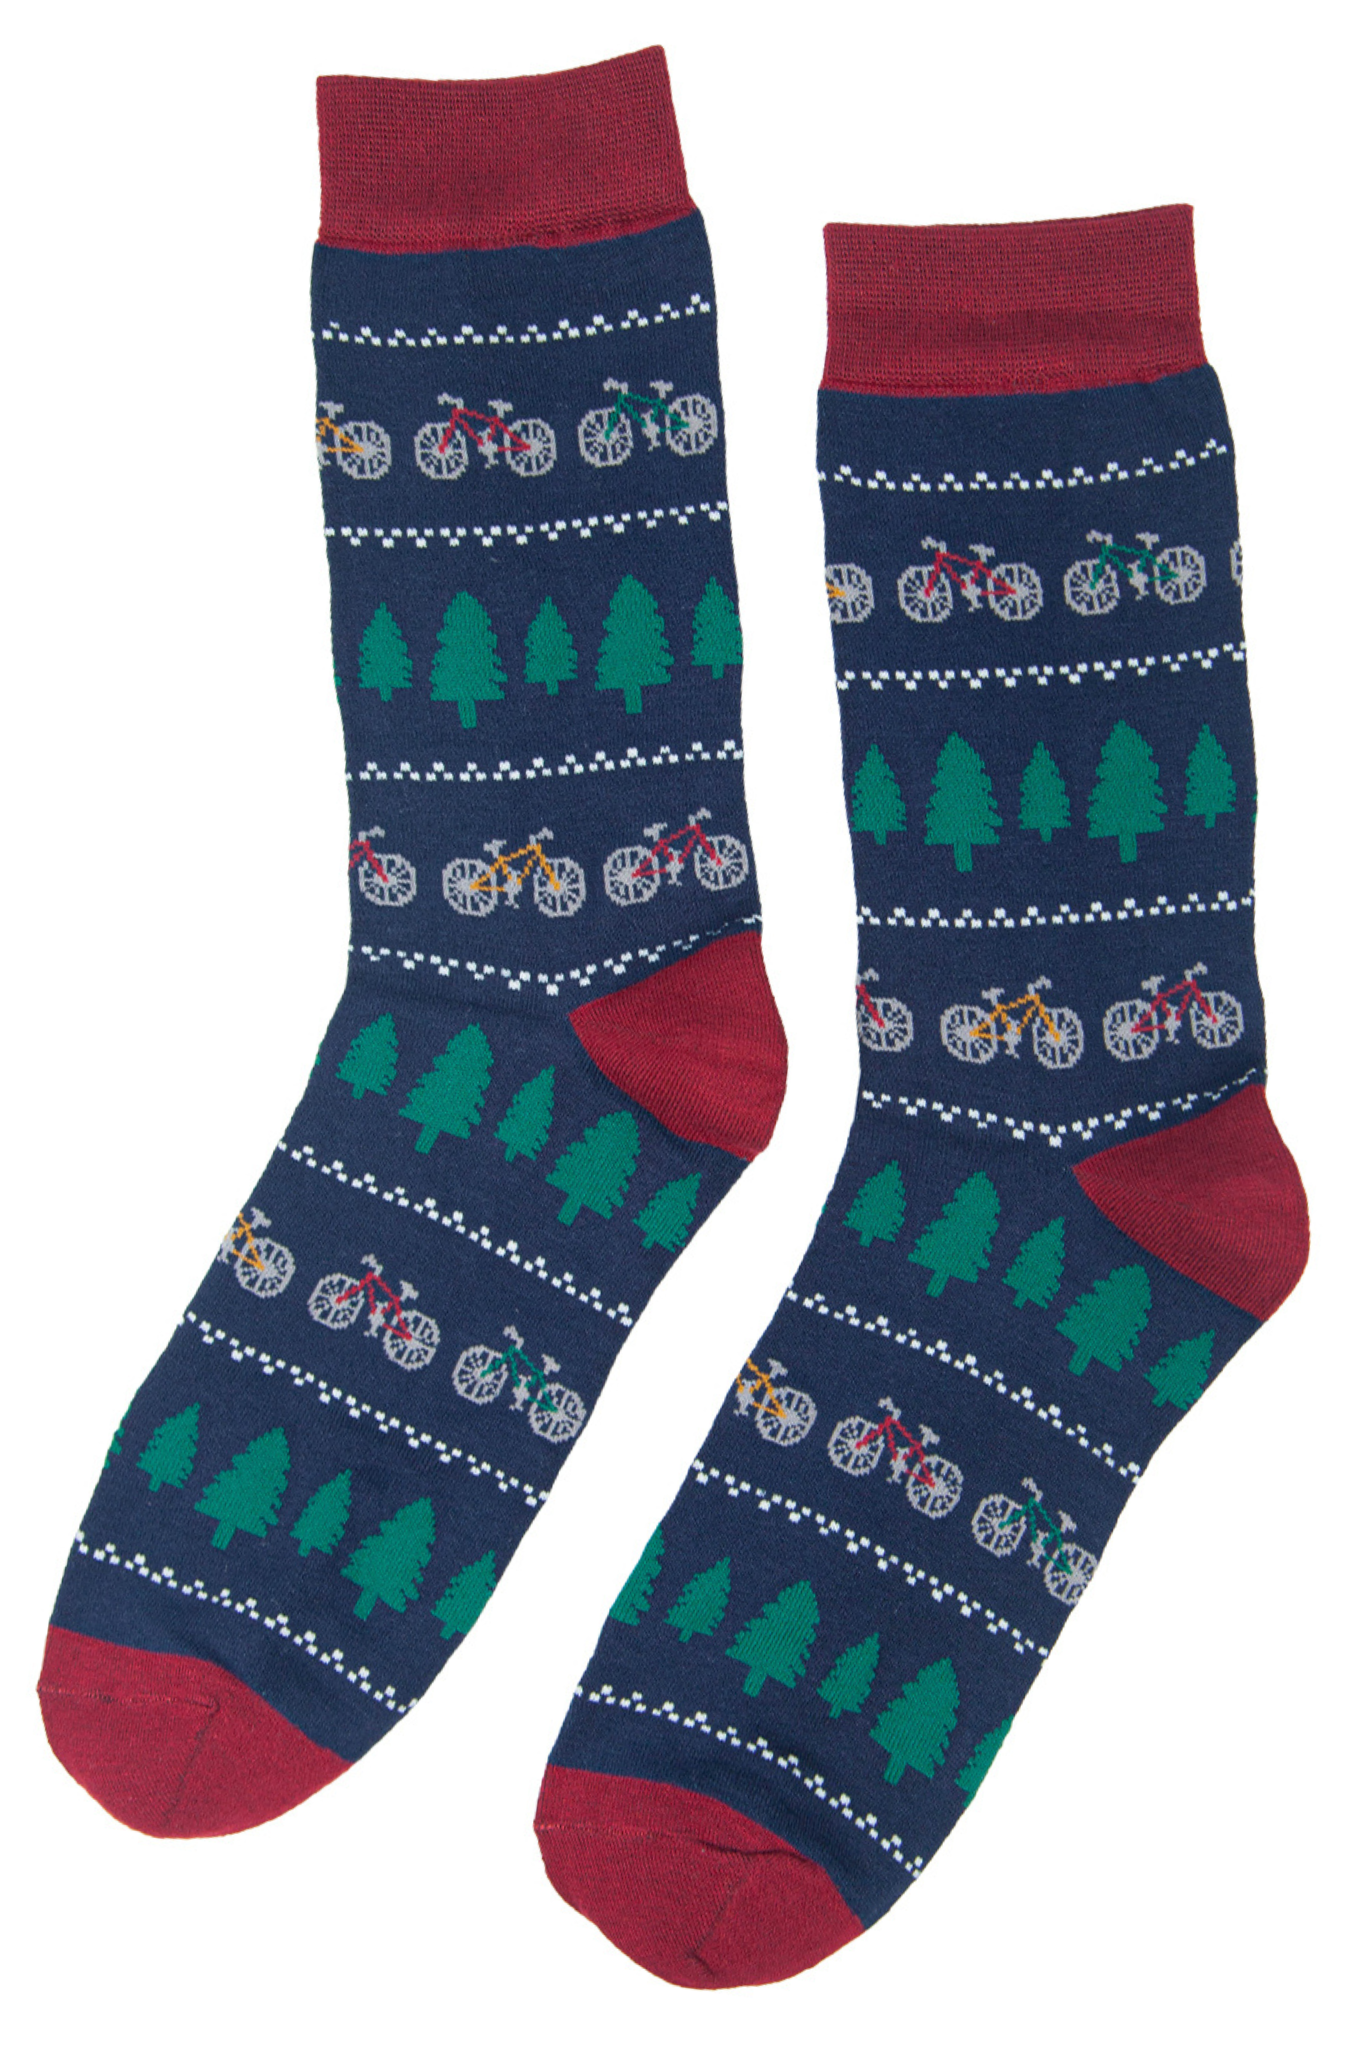 navy blue and red bamboo socks with mountain bikes and trees